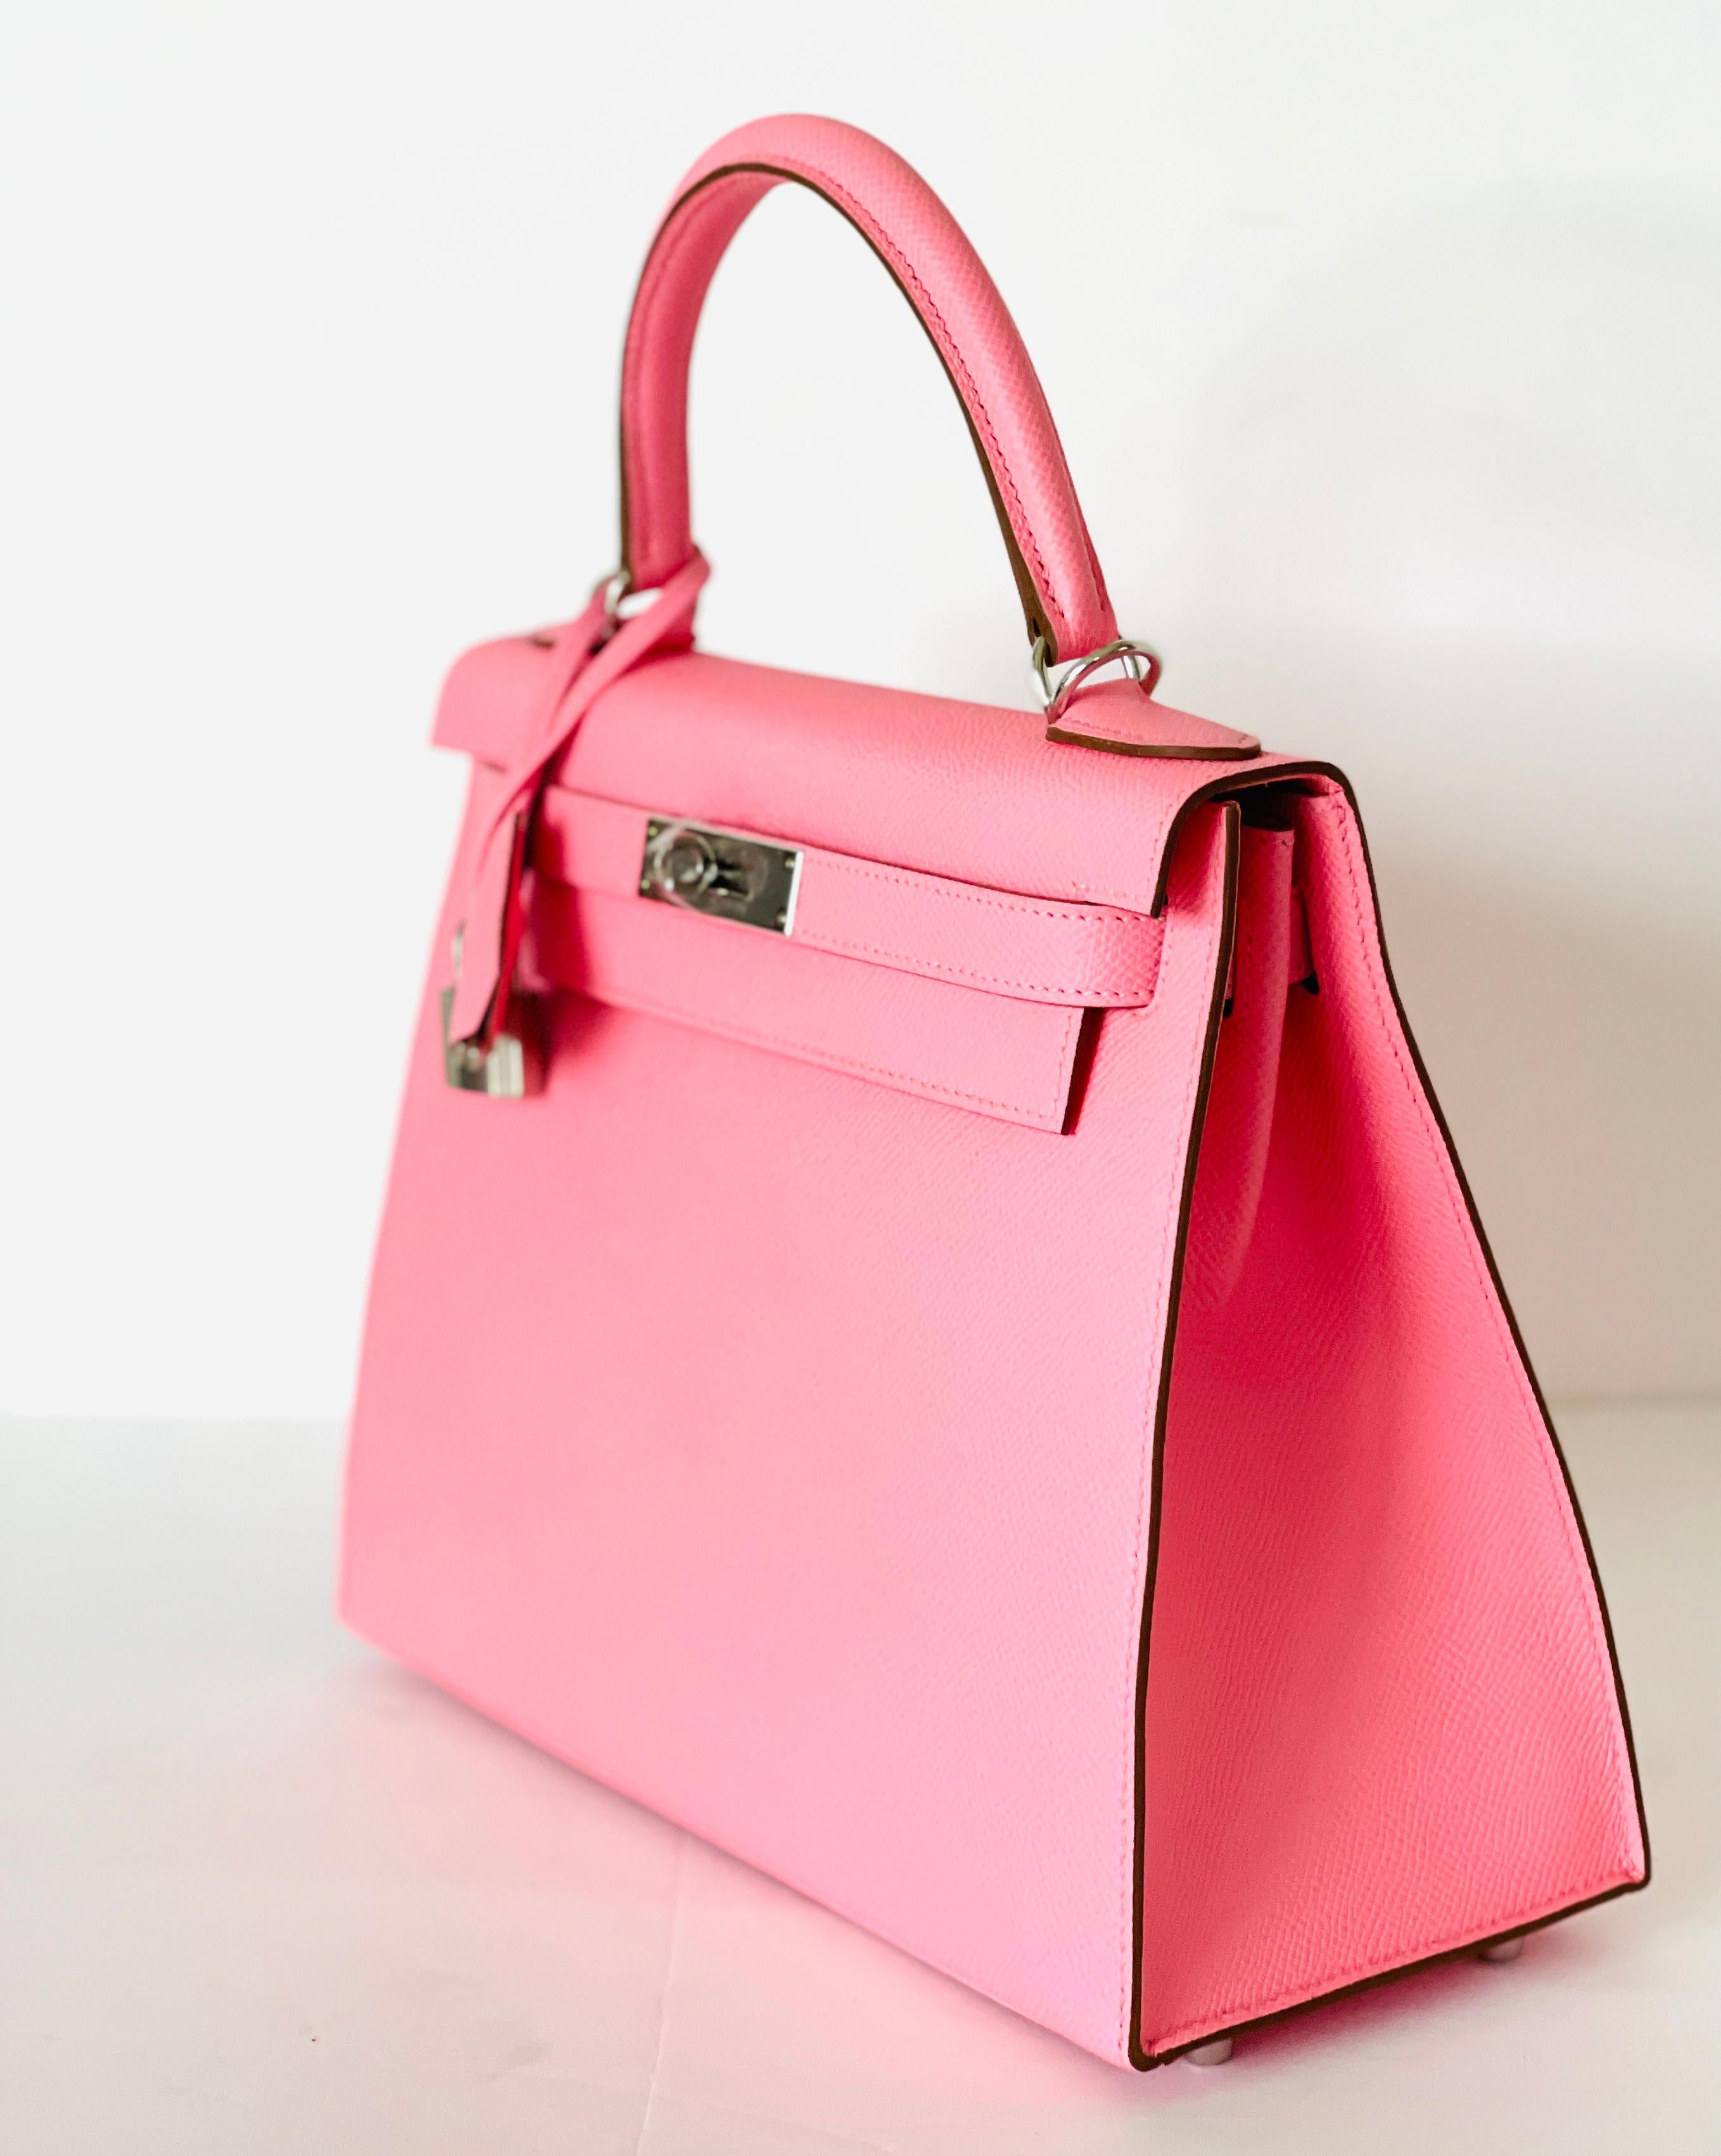 Hermès 
Kelly 28 cm 
Rose Confetti, retired color that has been brought back for a limited time
Epsom Leather, Sellier Style
Tonal topstich 
Palladium Hardware
Top handle with removable shoulder strap 




New, never worn
Storefresh with plastic on